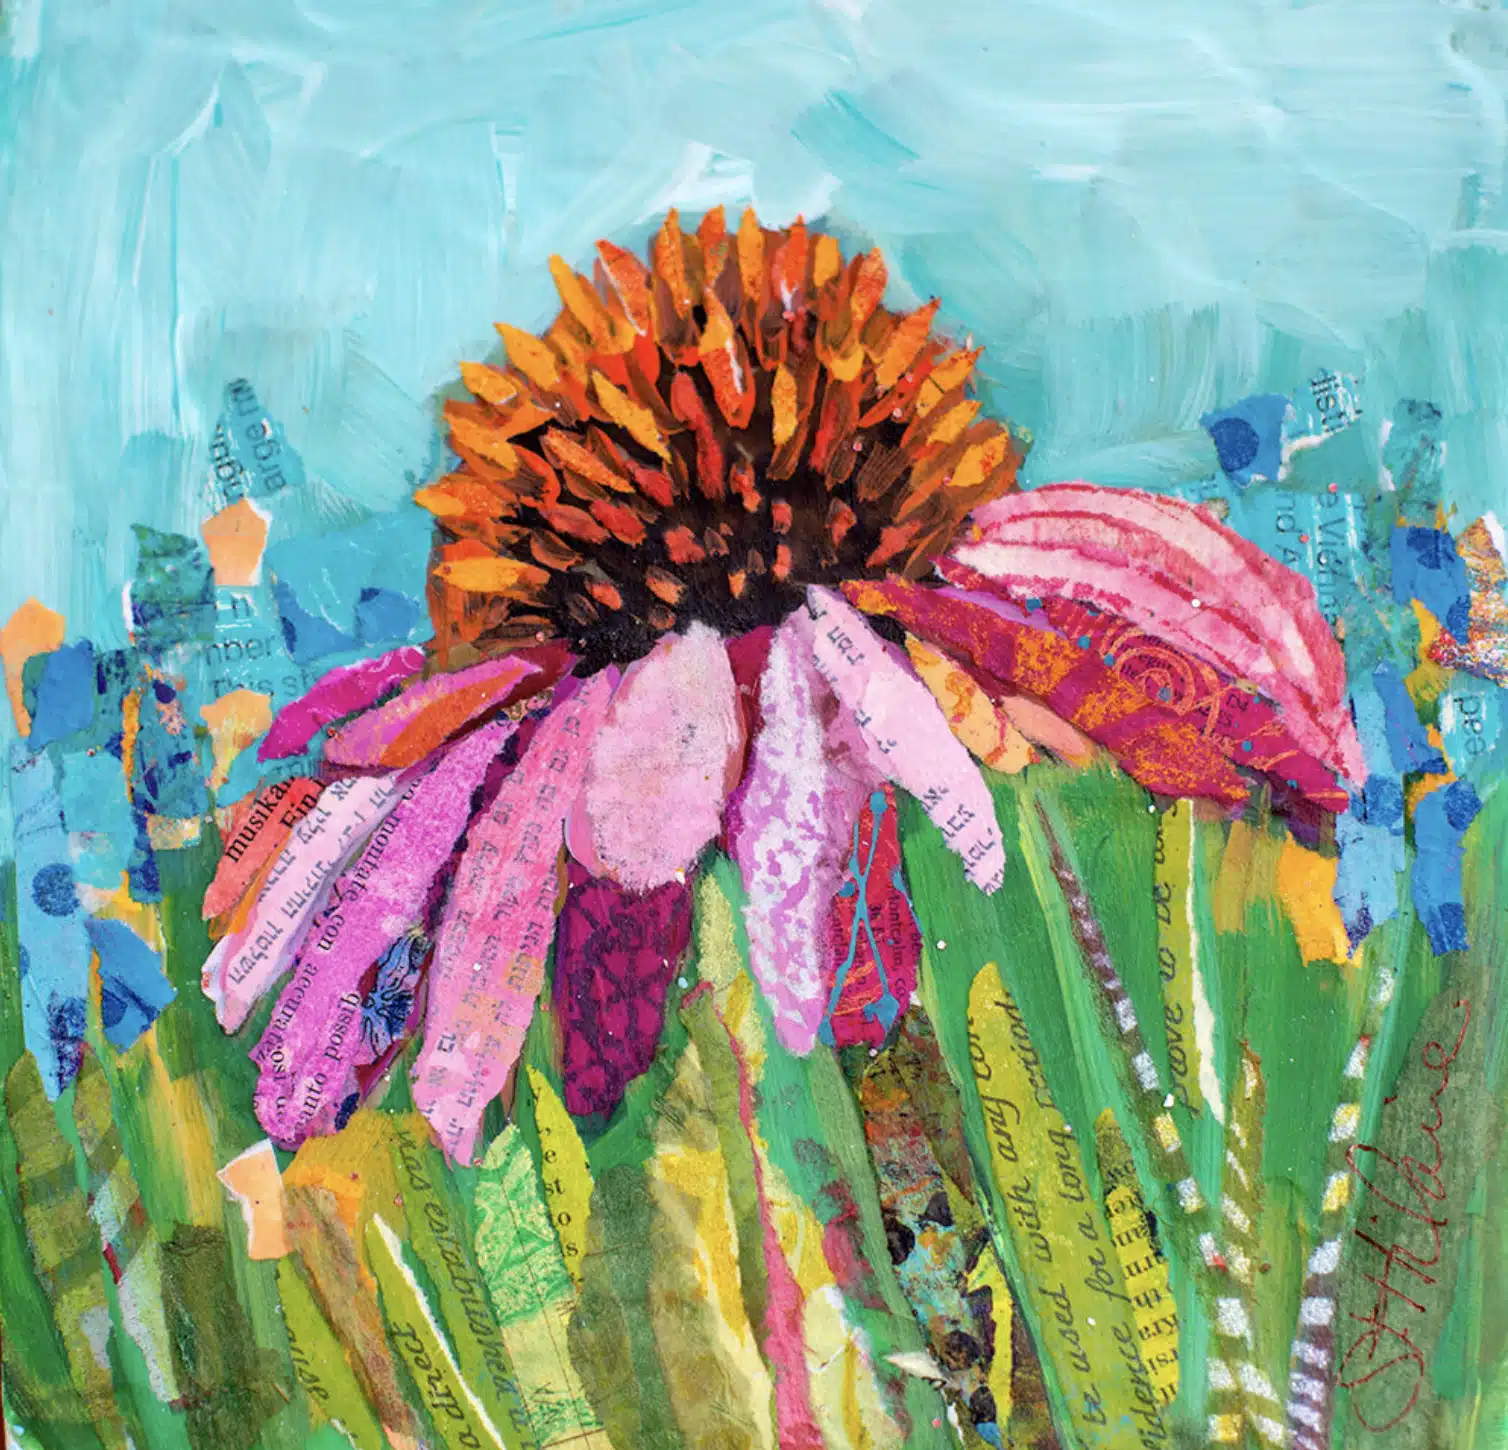 “Coneflower” by Elizabeth St. Hilaire